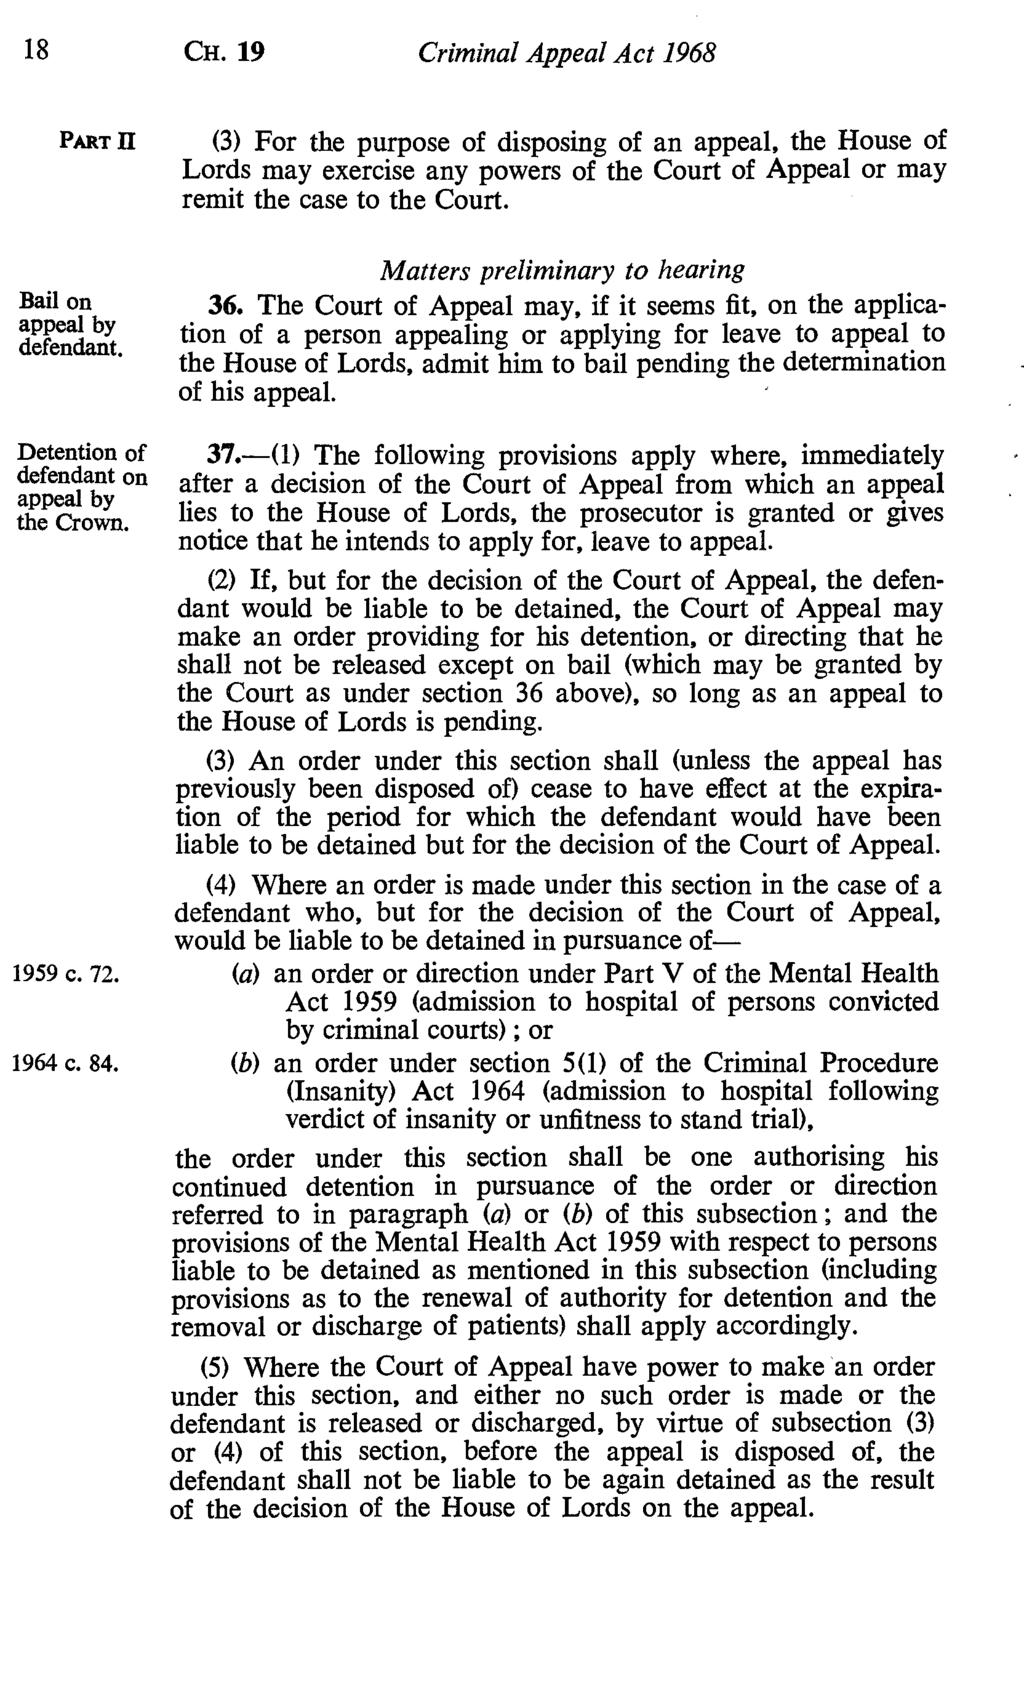 18 CH. 19 Criminal Appeal Act 1968 PART R (3) For the purpose of disposing of an appeal, the House of Lords may exercise any powers of the Court of Appeal or may remit the case to the Court.